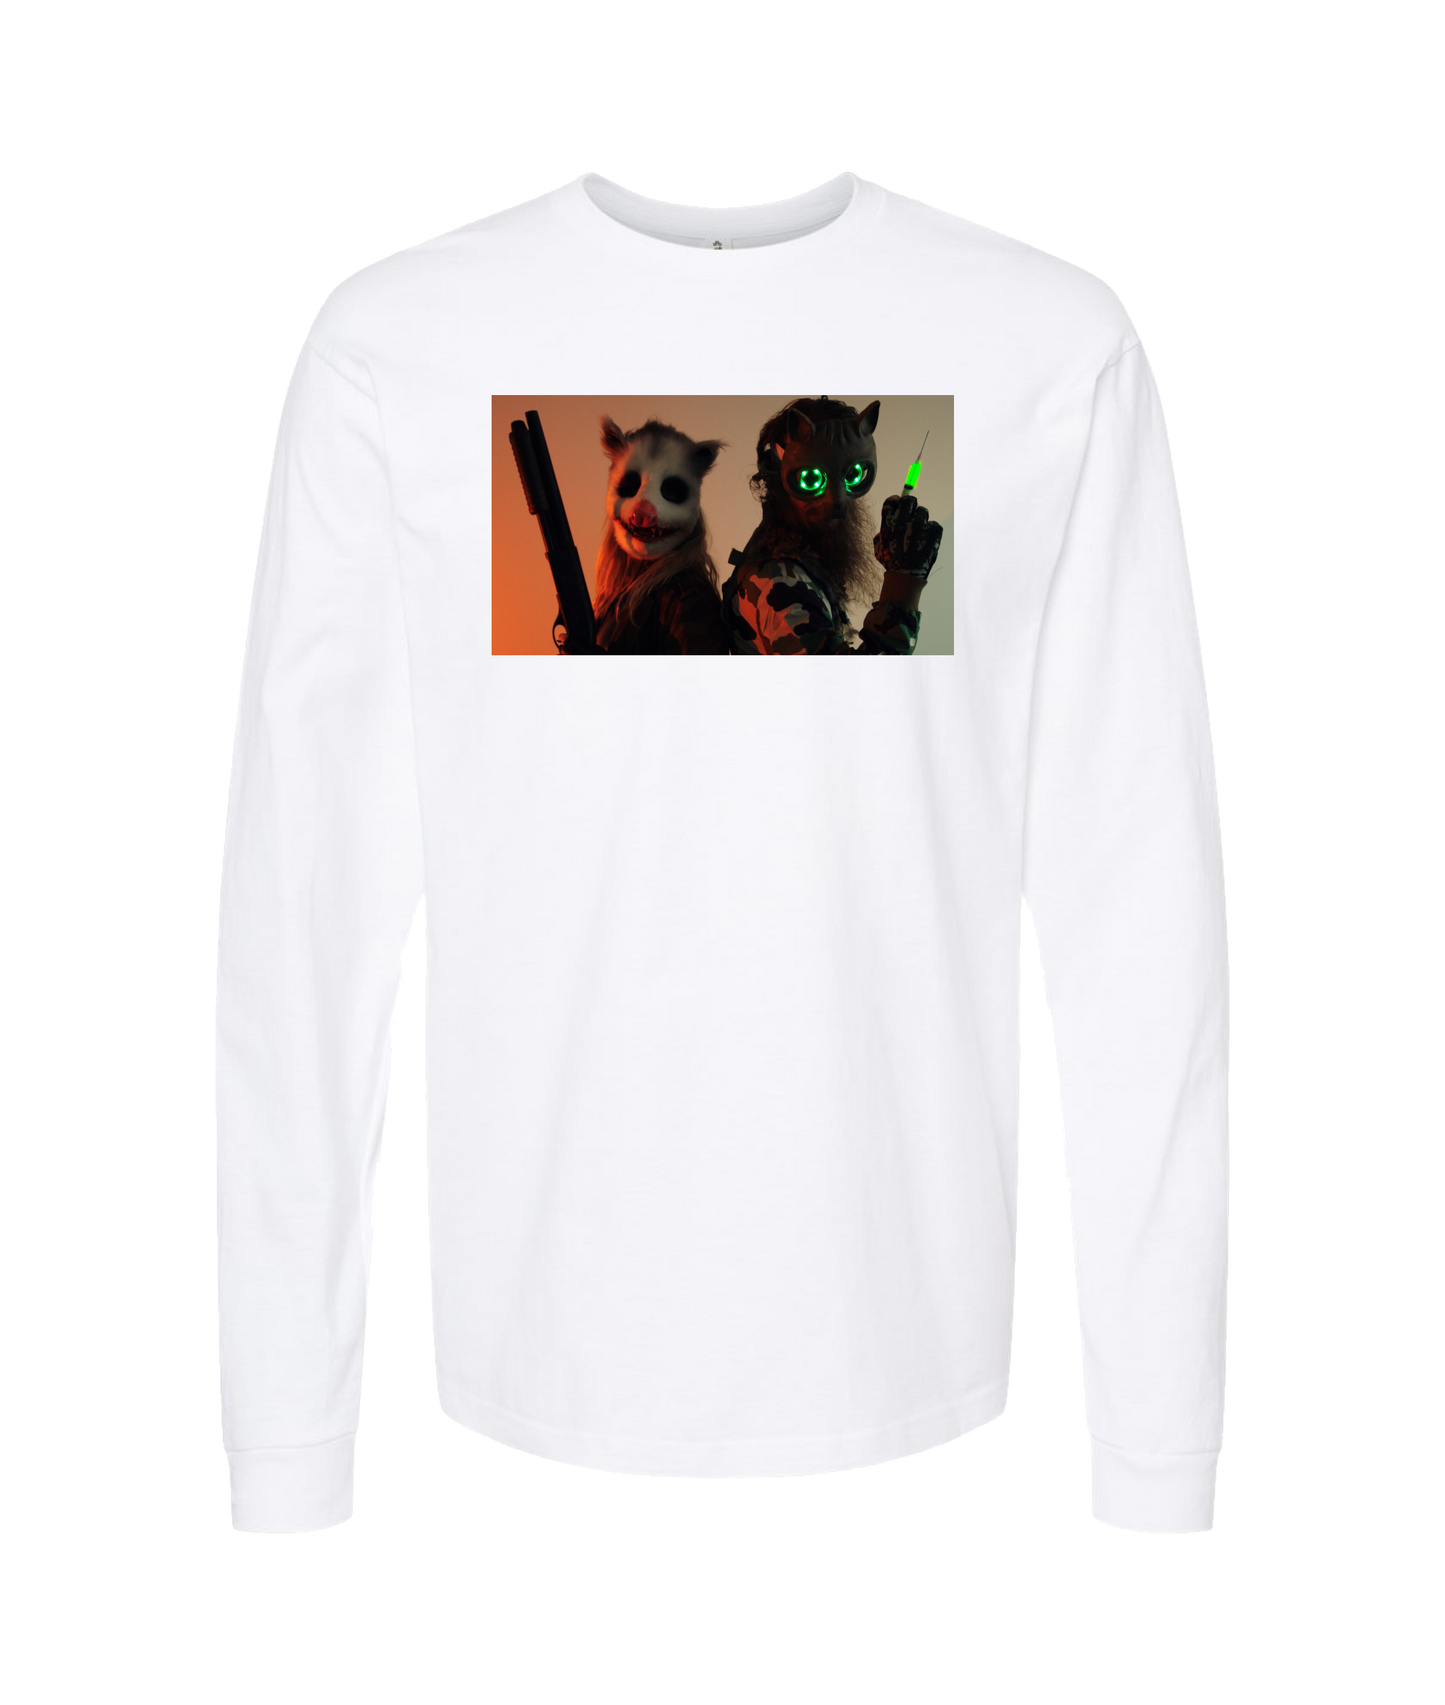 Refinery Films - GRINNERS GARB 01-1 - White Long Sleeve T